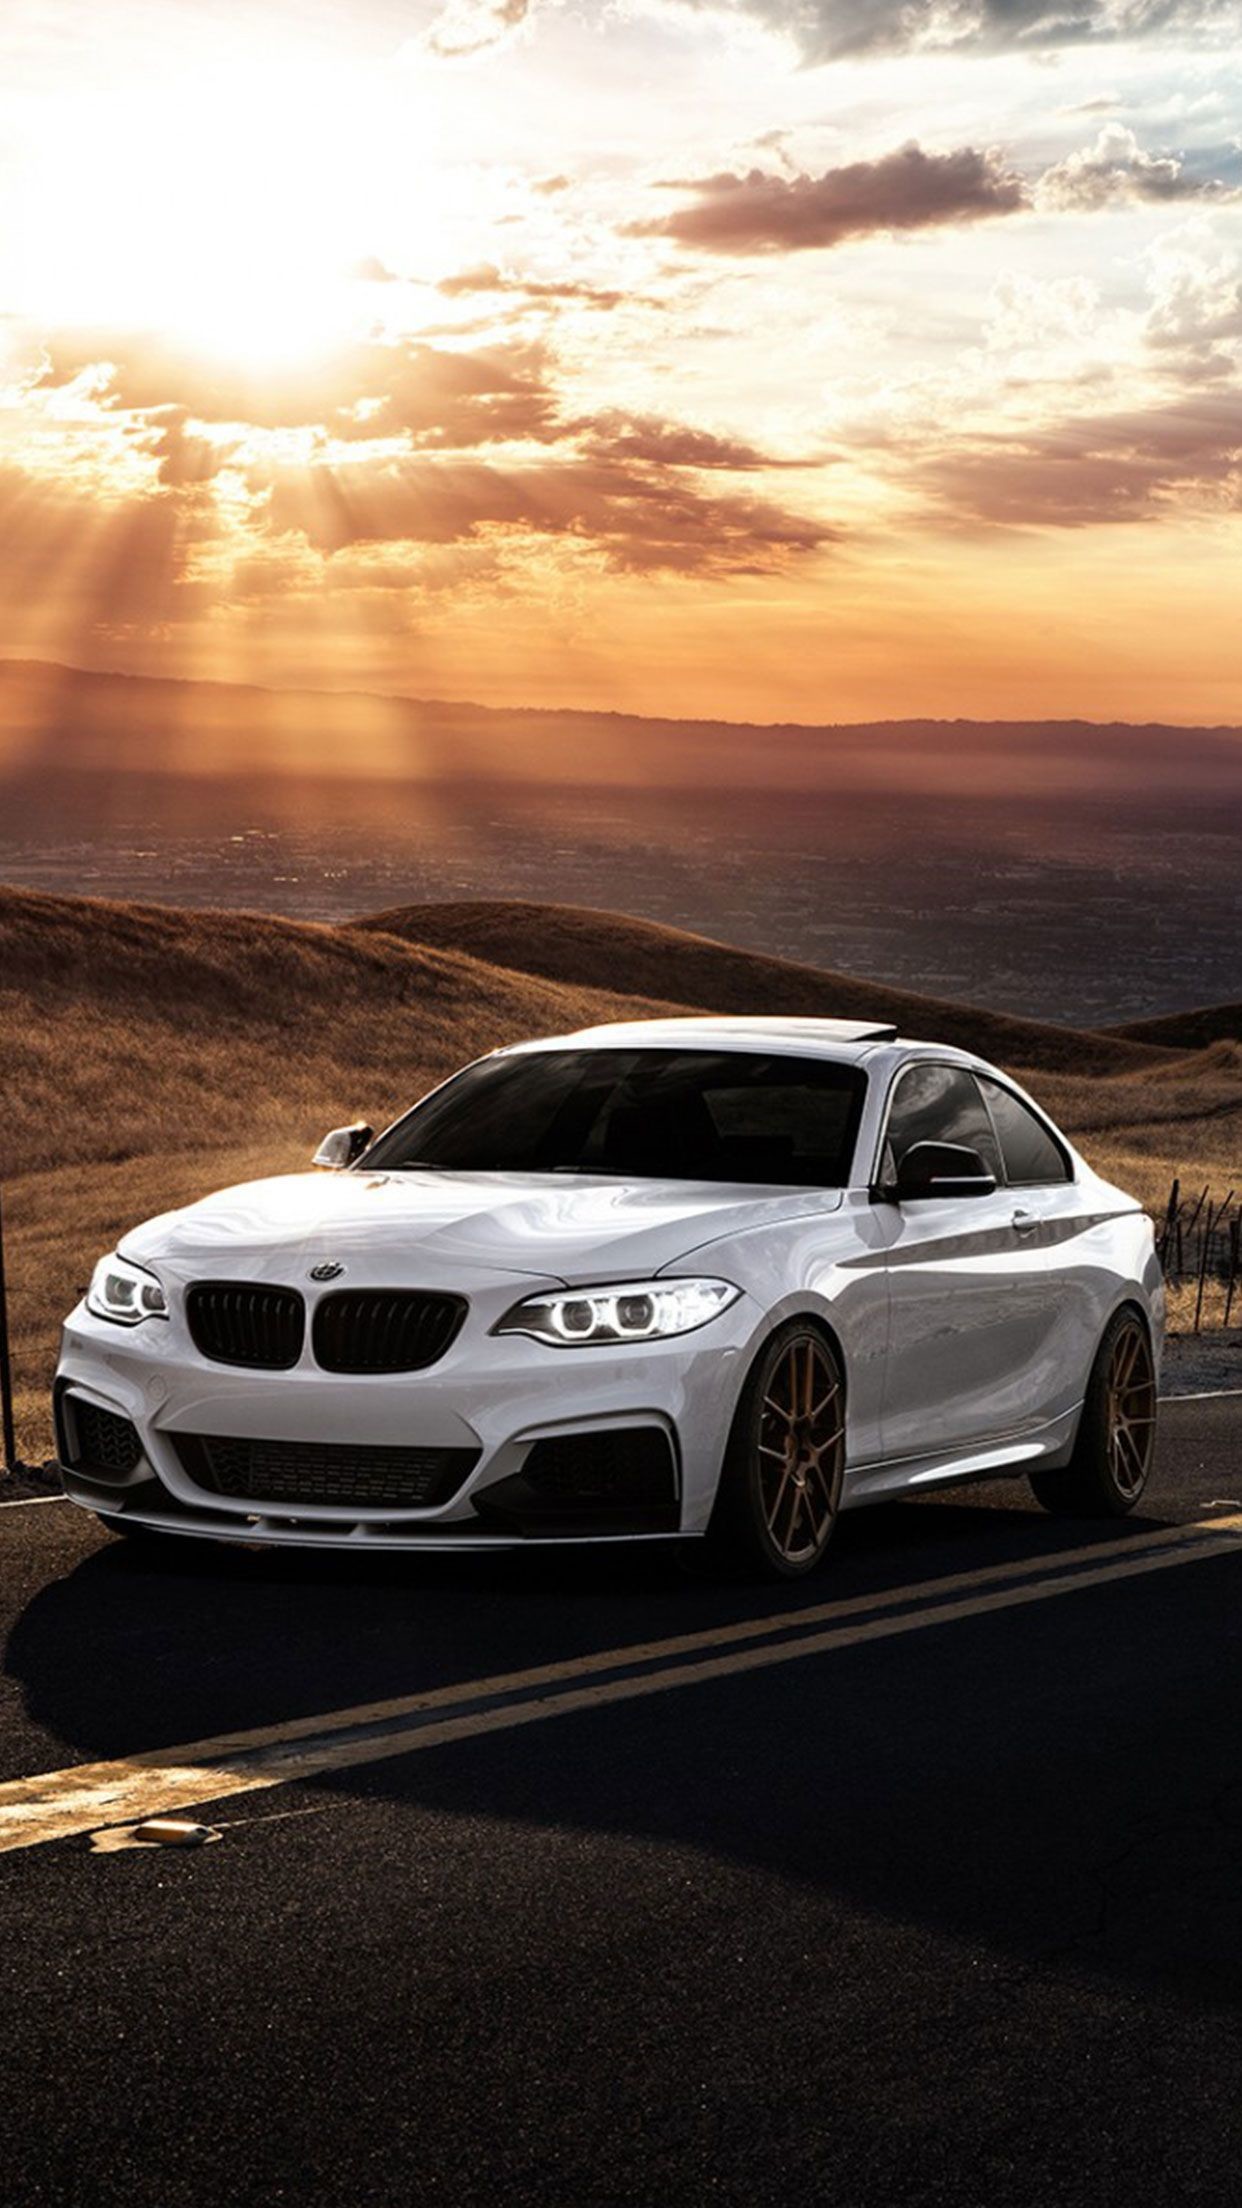 1242x2208 White Car BMW wallpaper for #Iphone and #Android #BMW #Car at wallzapp.com